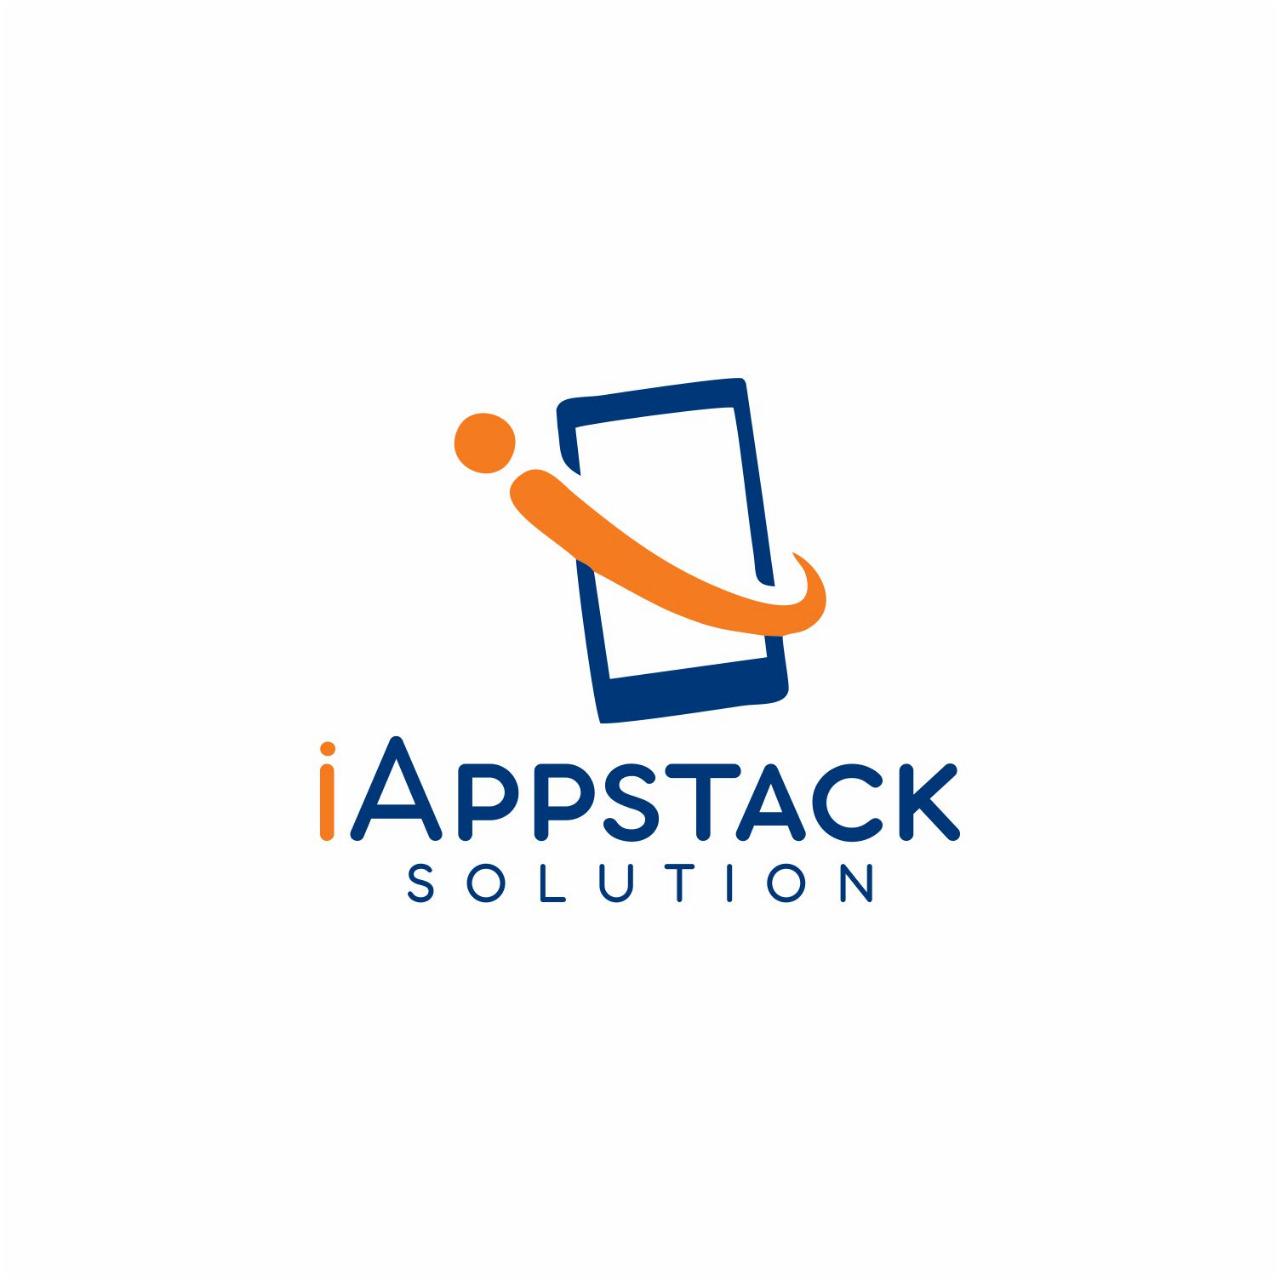 iAppstack Solutions profile on Qualified.One